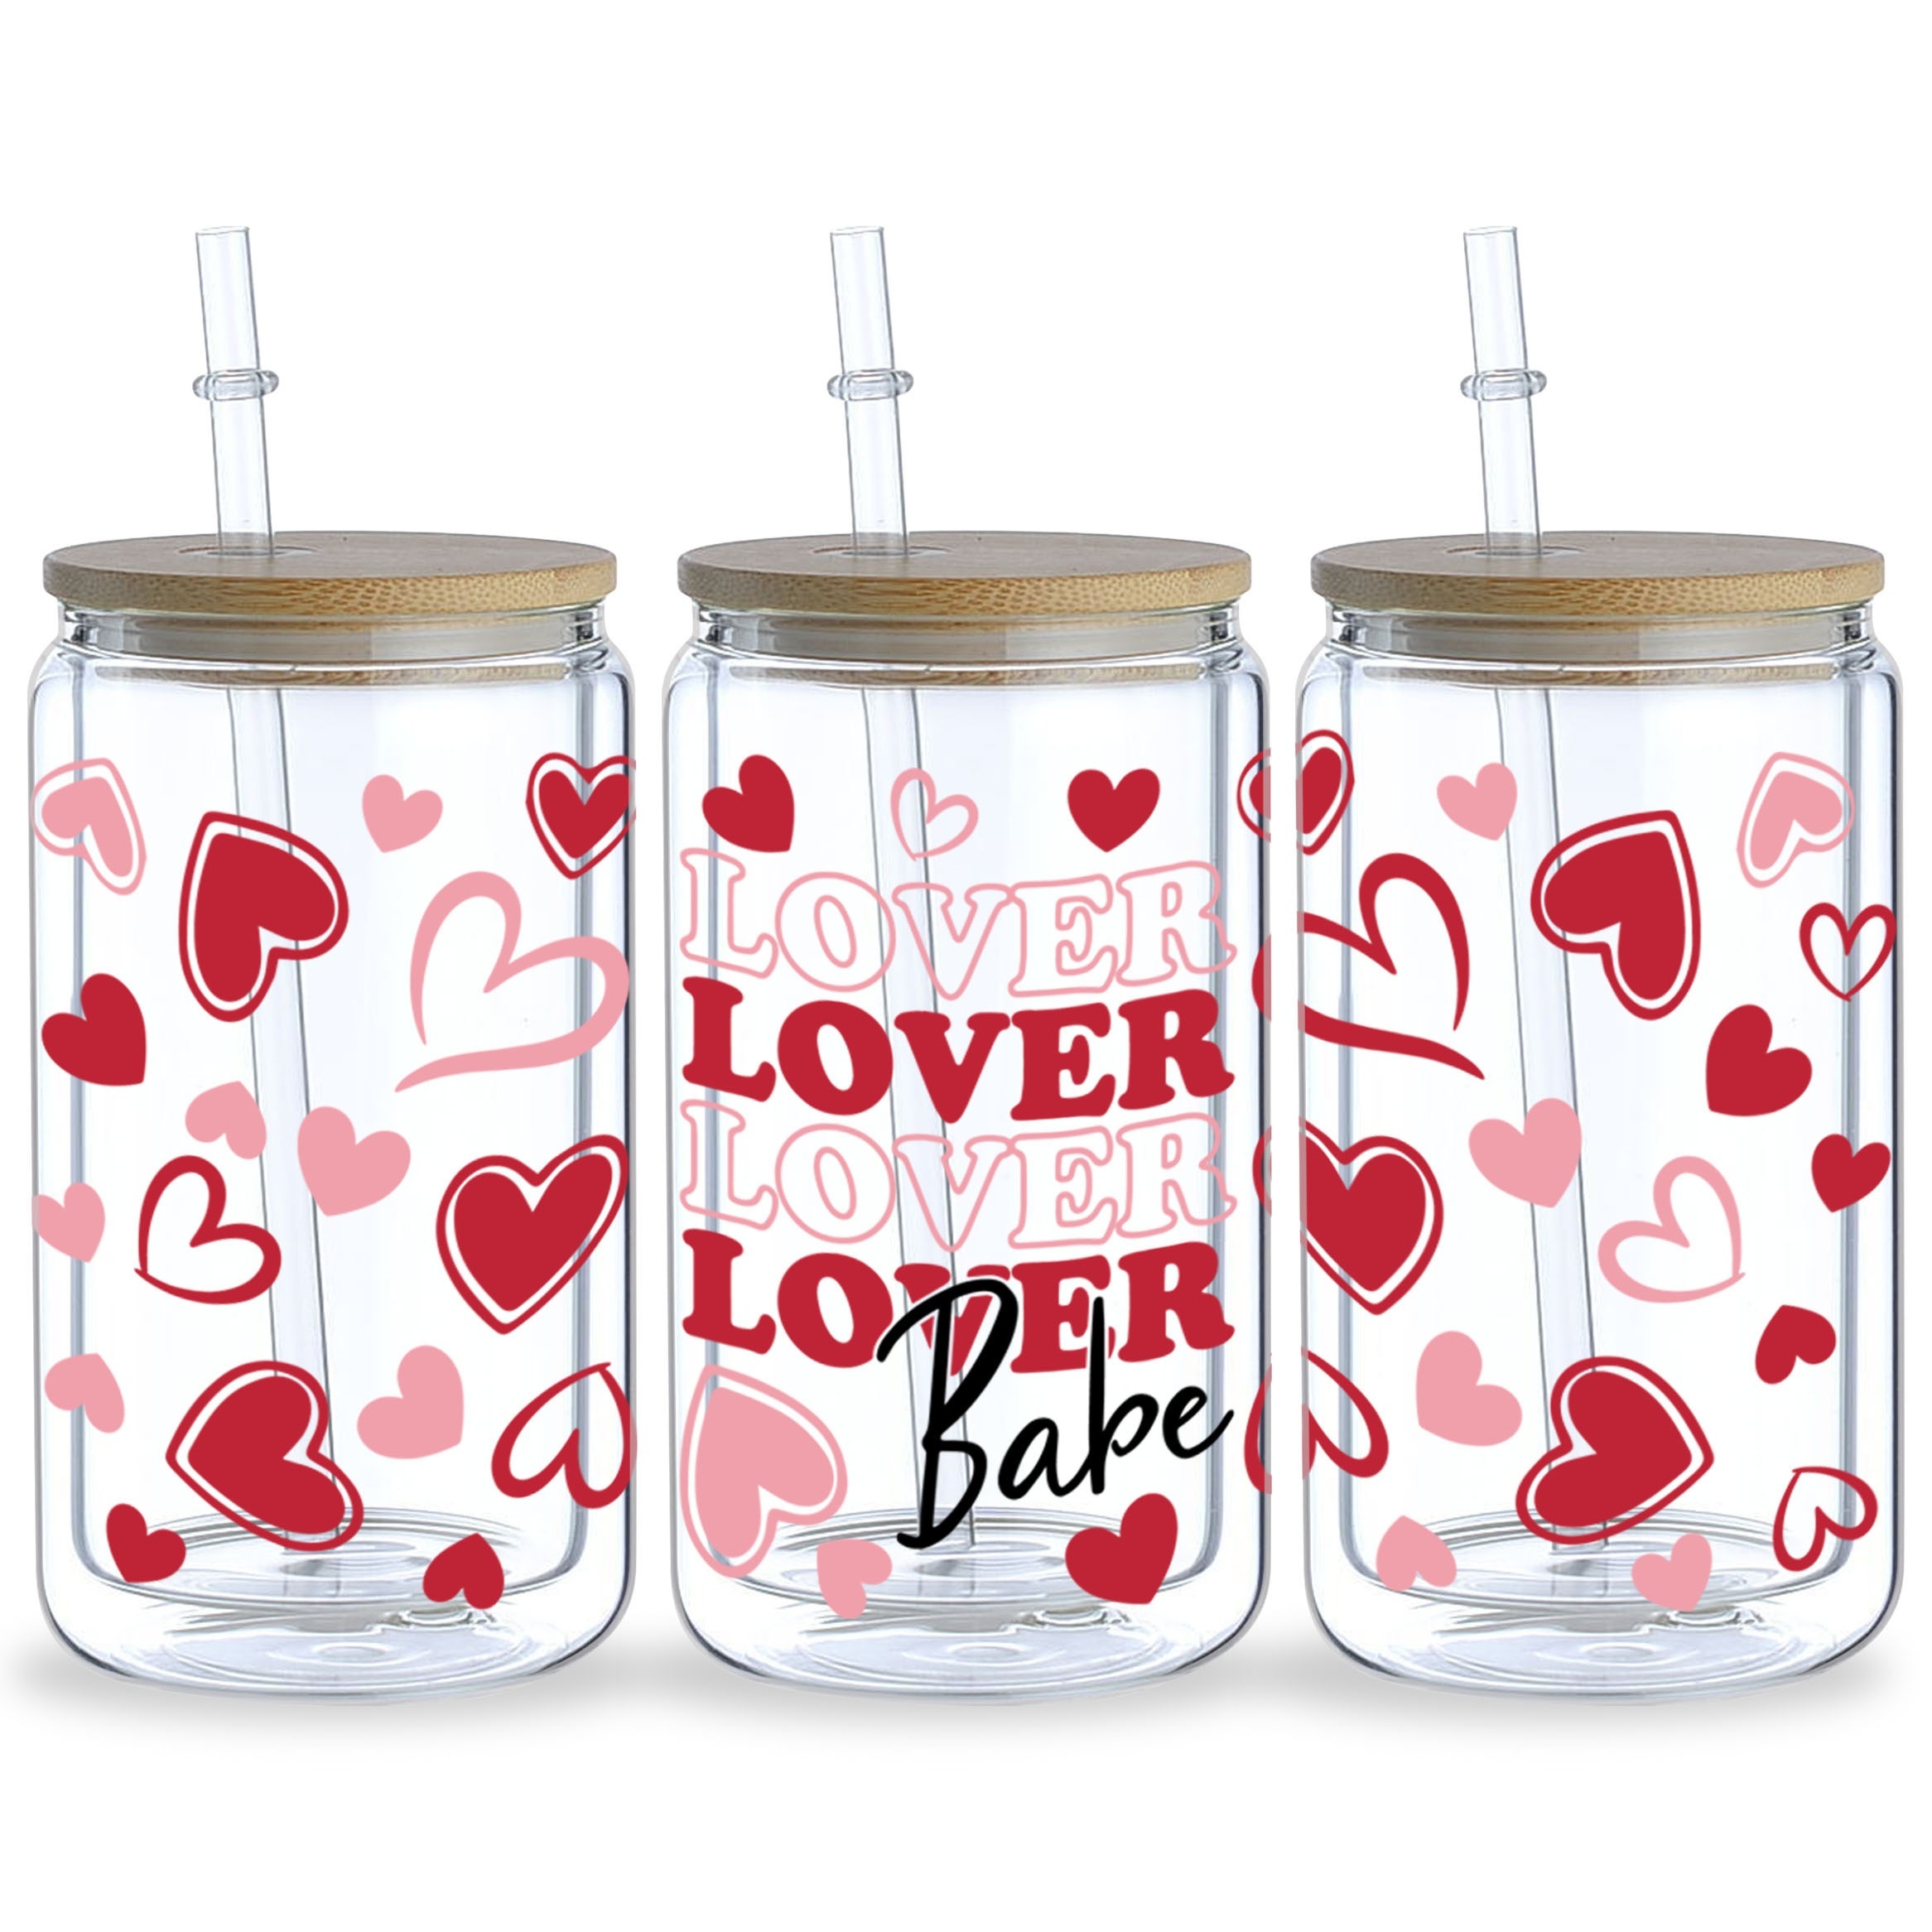 Uv Dtf Cup Wraps Design With Six Love Heart Shape For - Temu